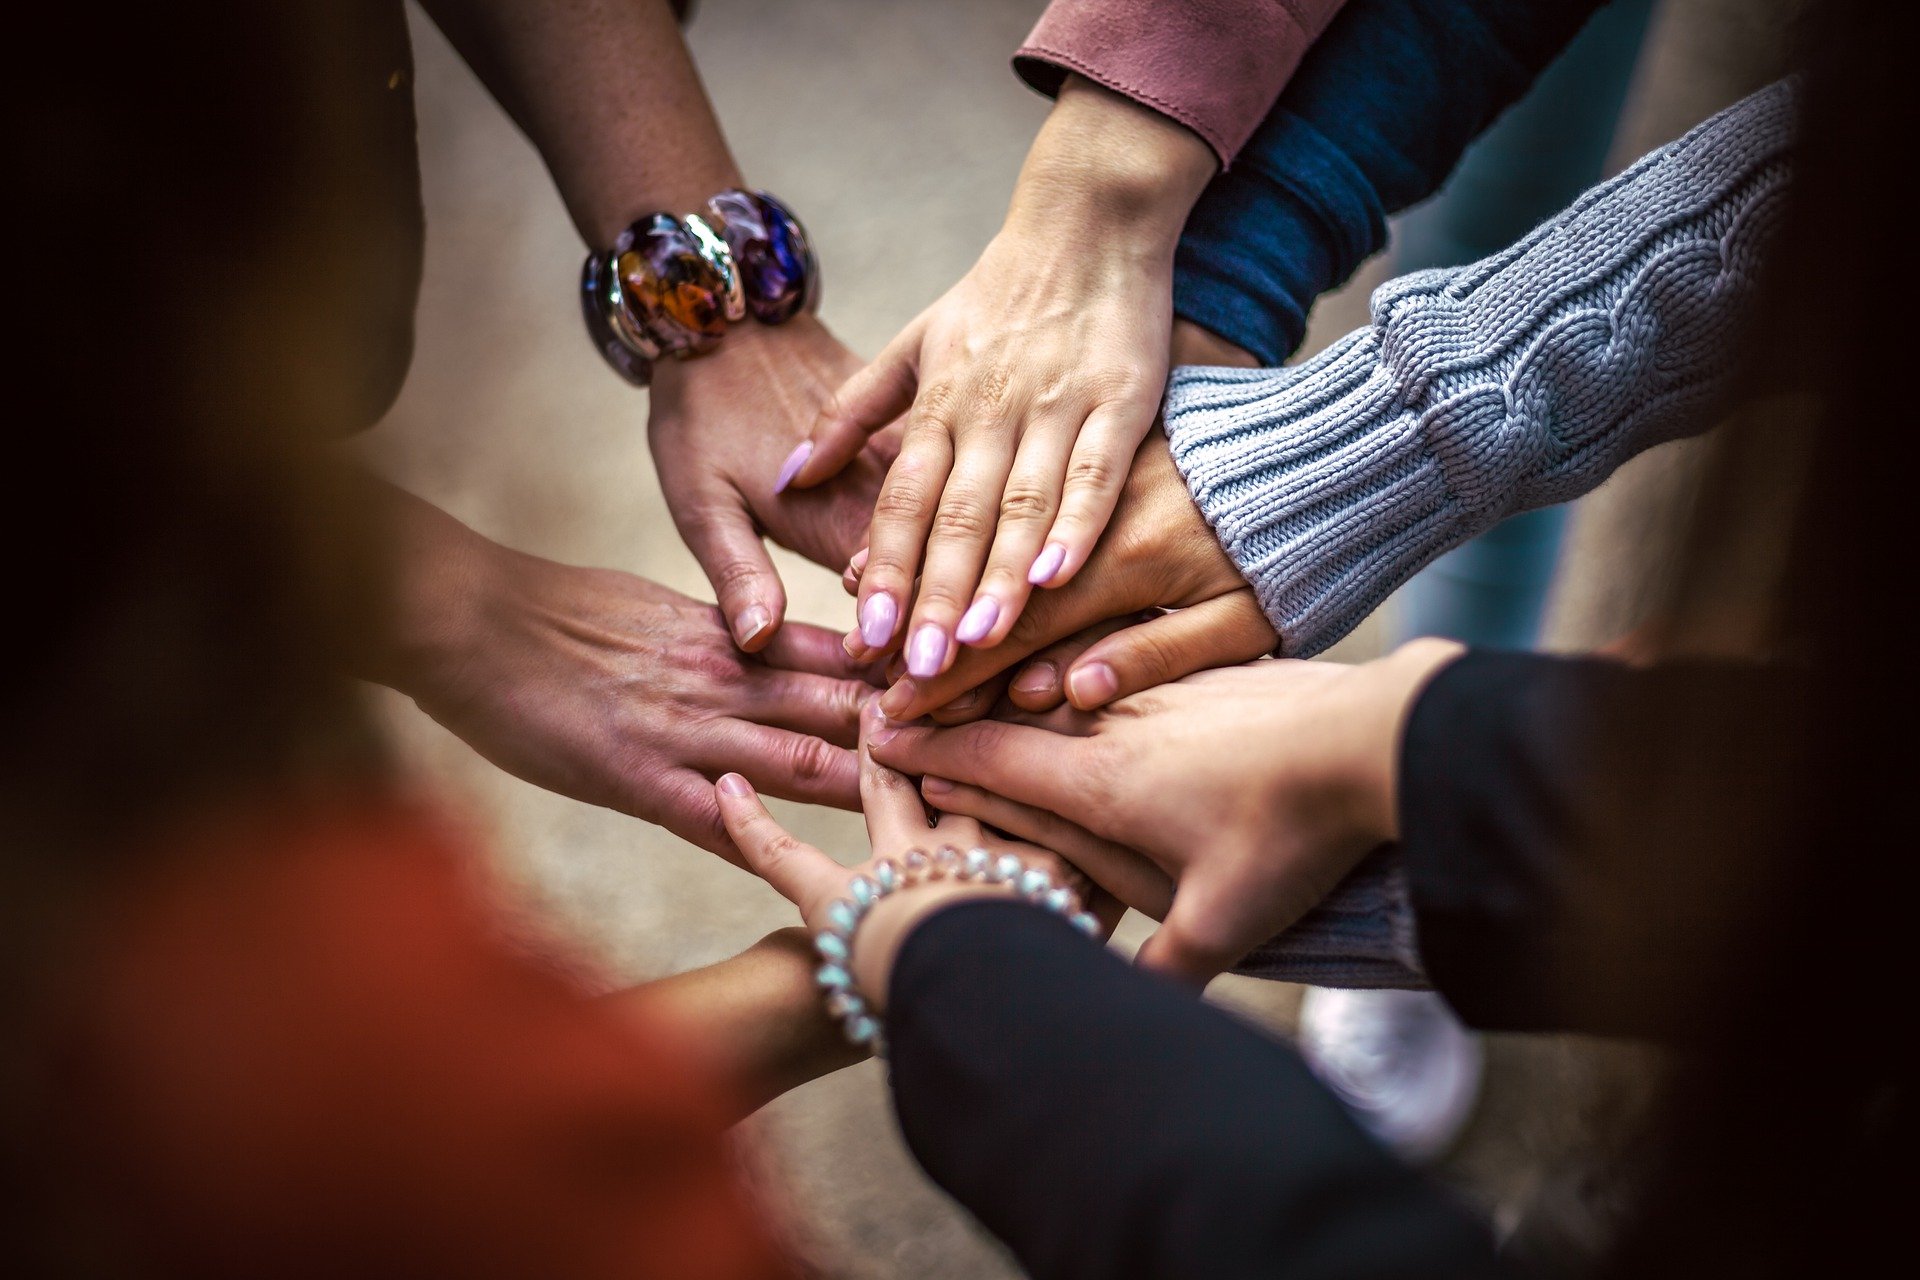 A group of people extending their hands and their hands touch.